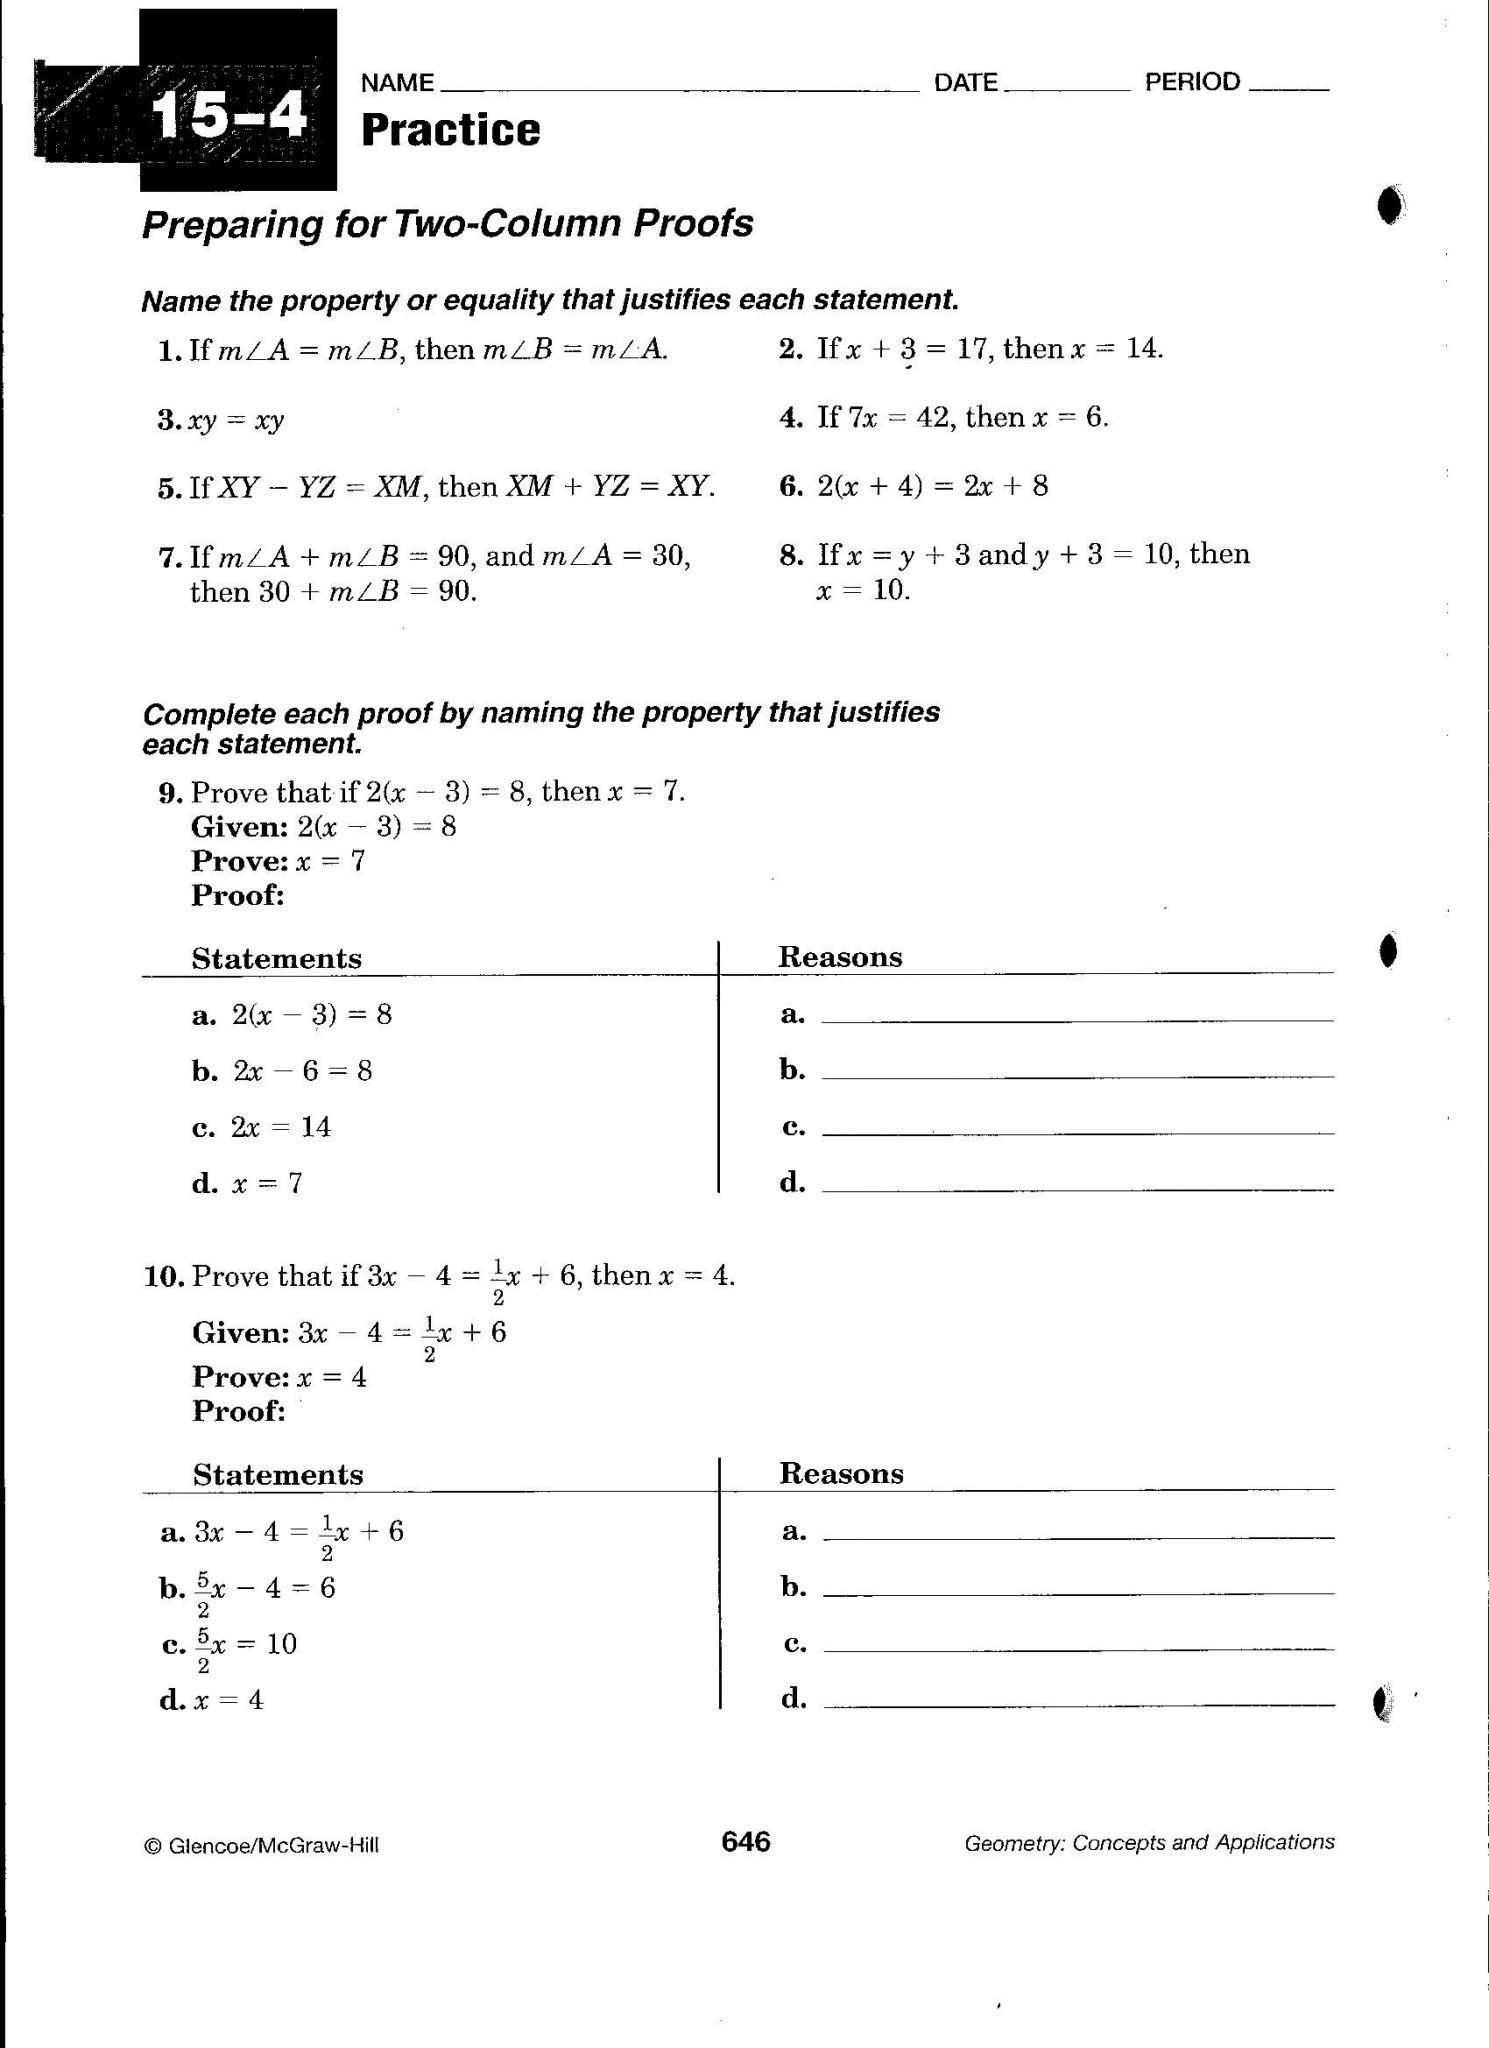 Proofs Practice Worksheet Answers | db-excel.com